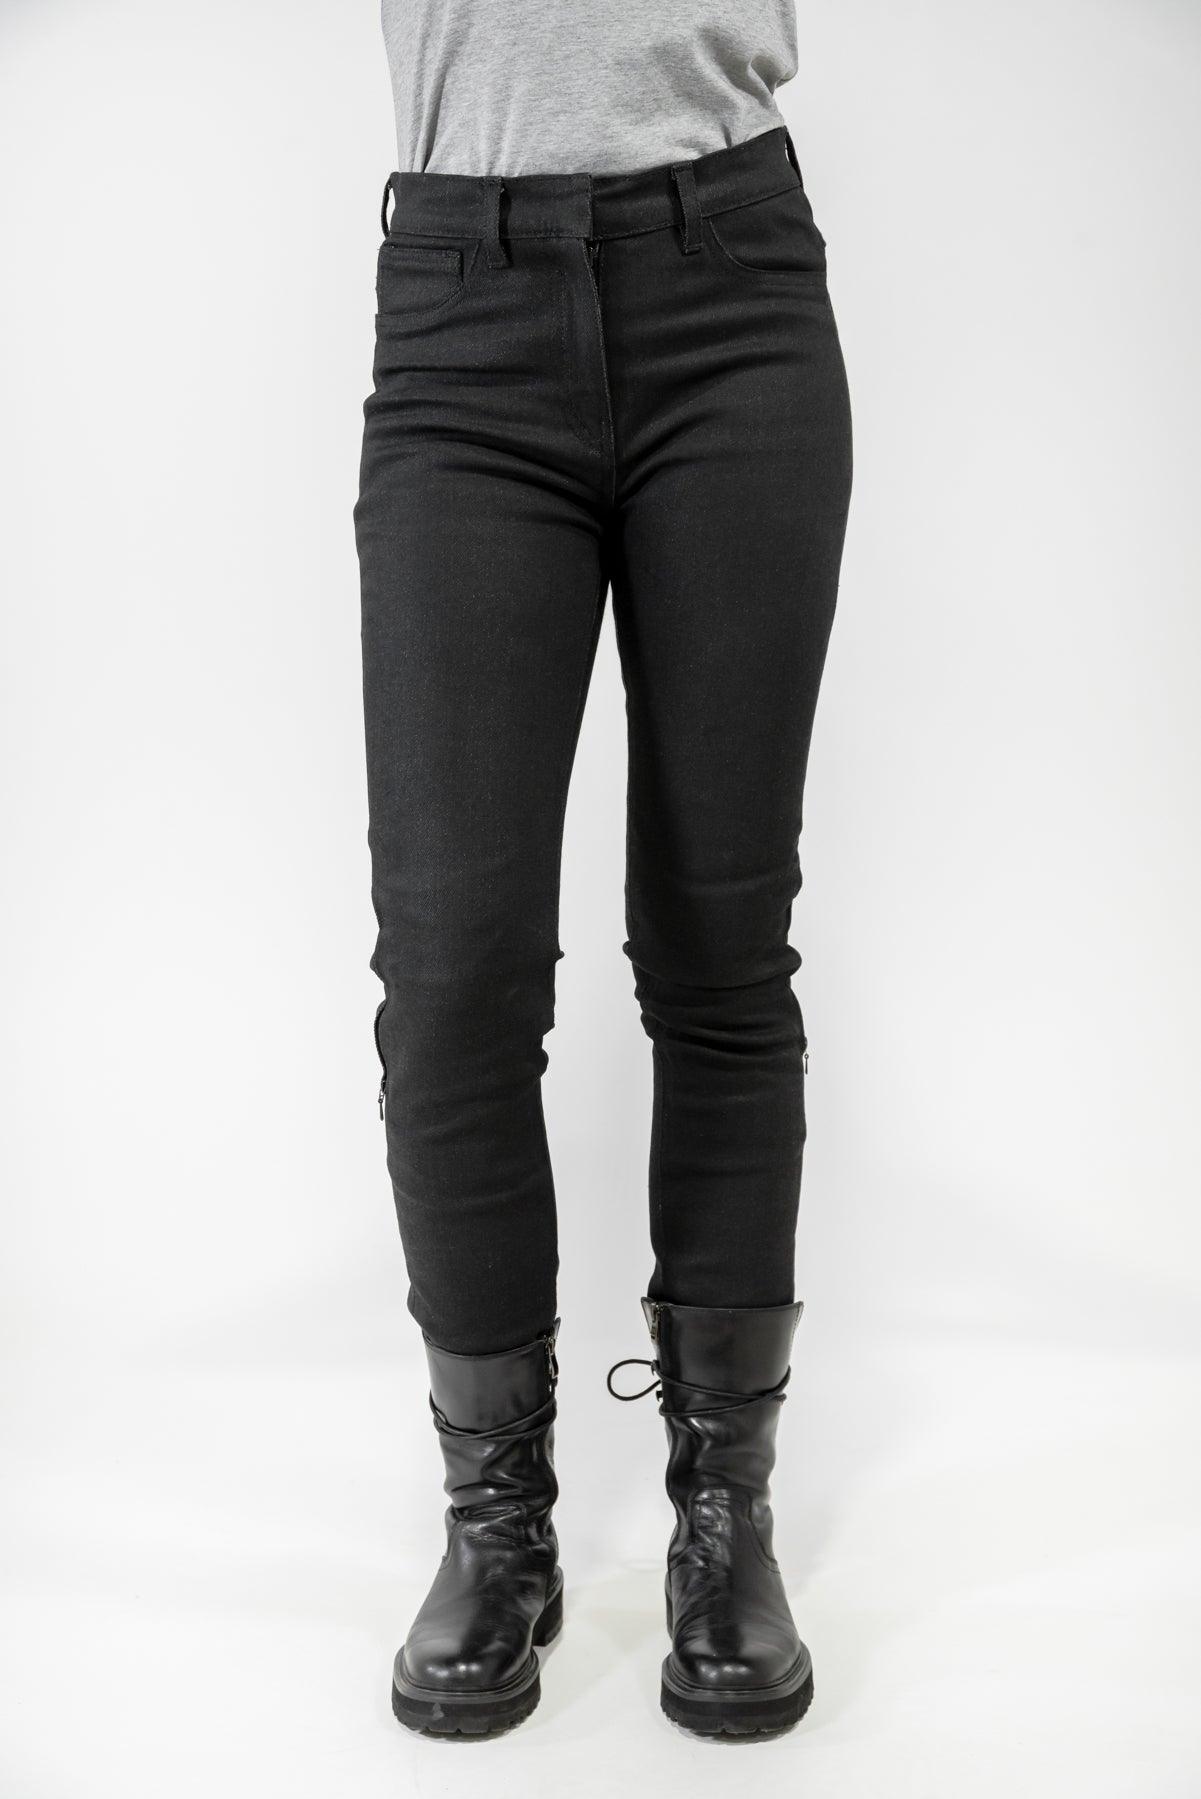 Marley Ladies SK Motorcycle Jeans  Skinny fit riding denim for fashionable  urban female riders.